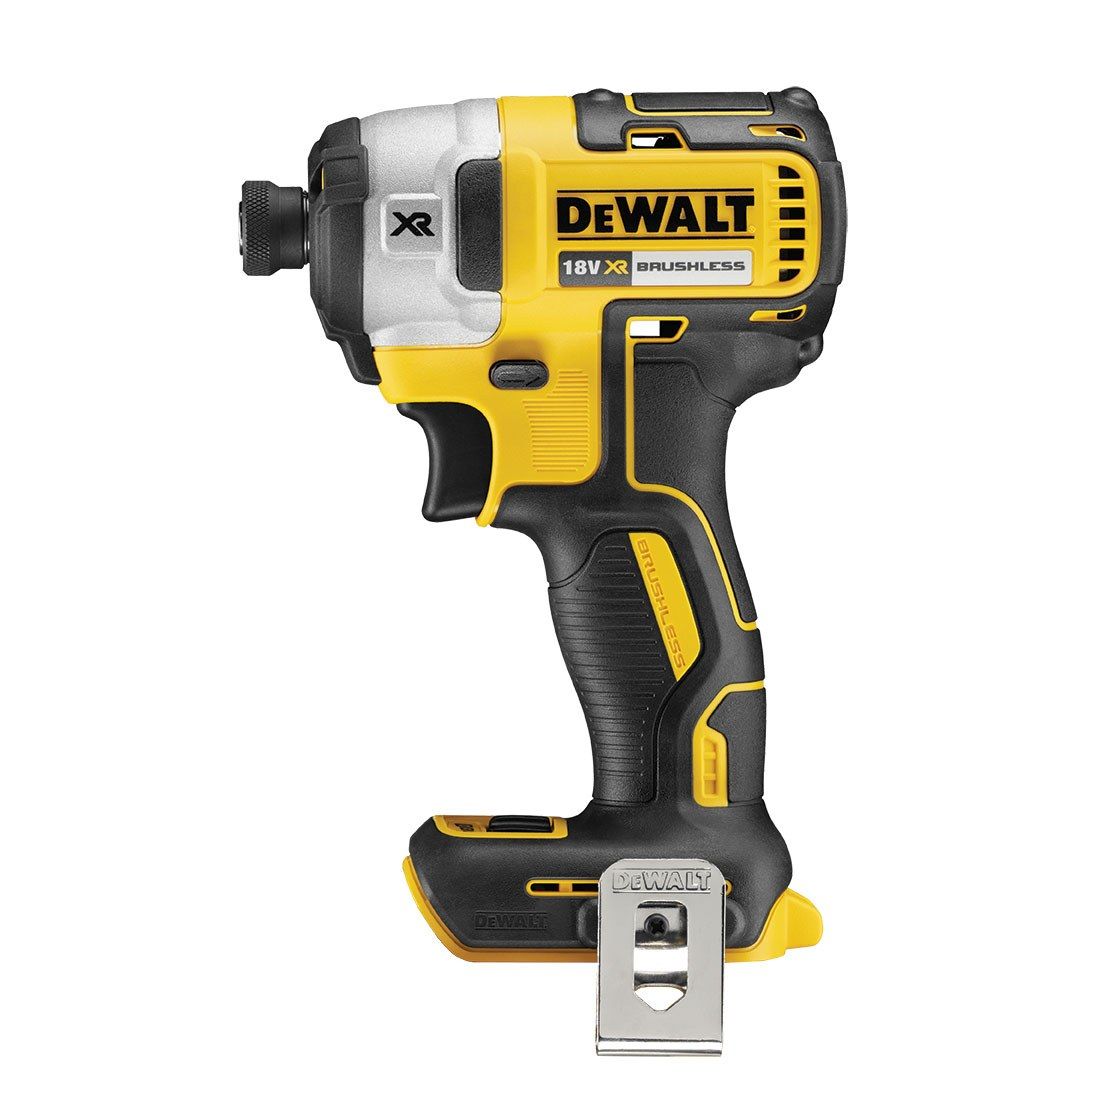 DeWalt DCF887M2-GB - XR 18V Brushless 2nd Generation, 3 Speed Impact Driver Kit complete with 2 x 4.0Ah Batteries, Charger & Case